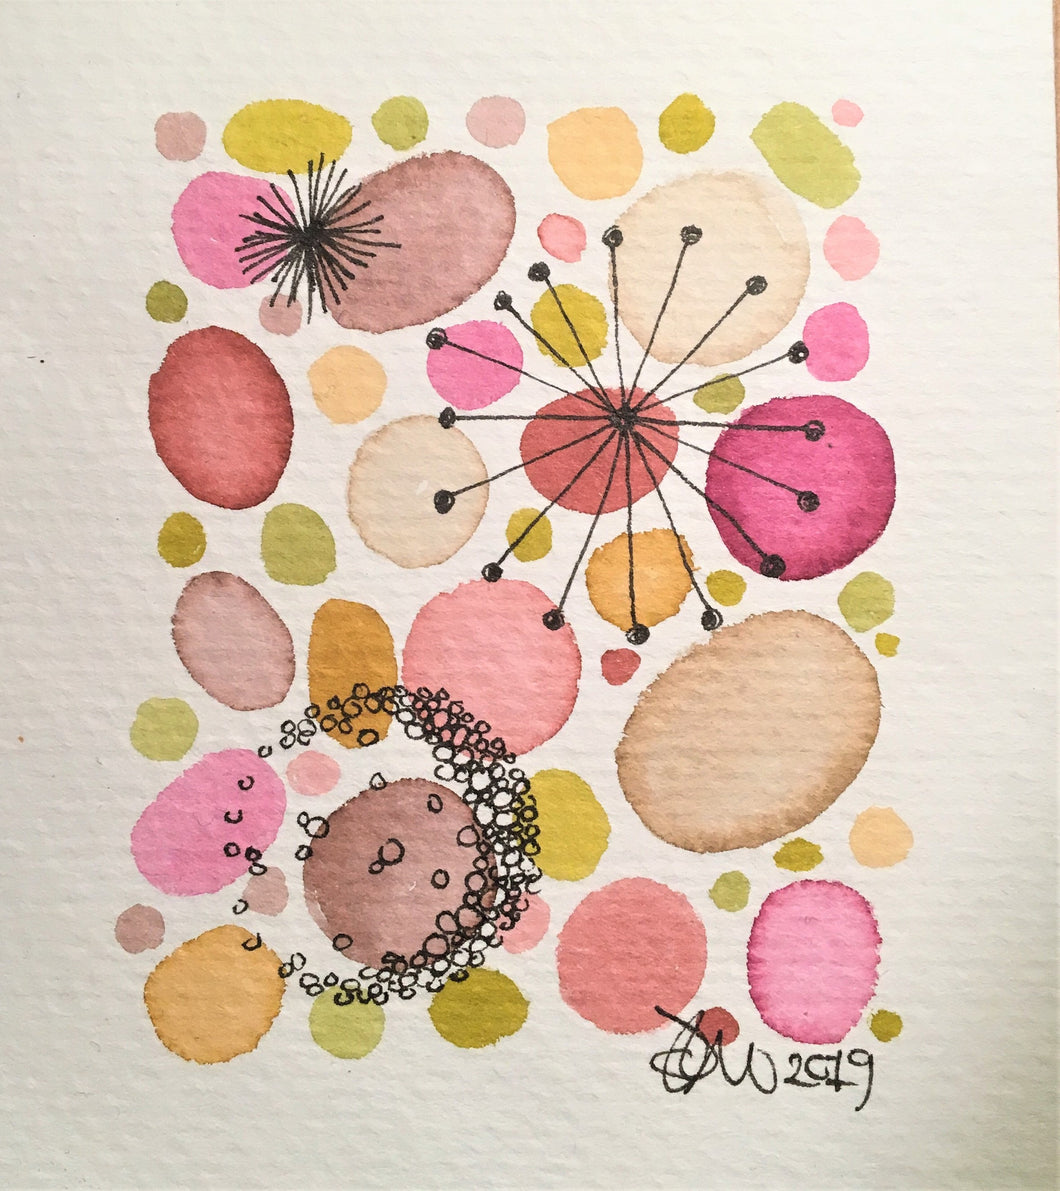 Handpainted Watercolour Greeting Card - Abstract Retro Circle and Star Design - eDgE dEsiGn London